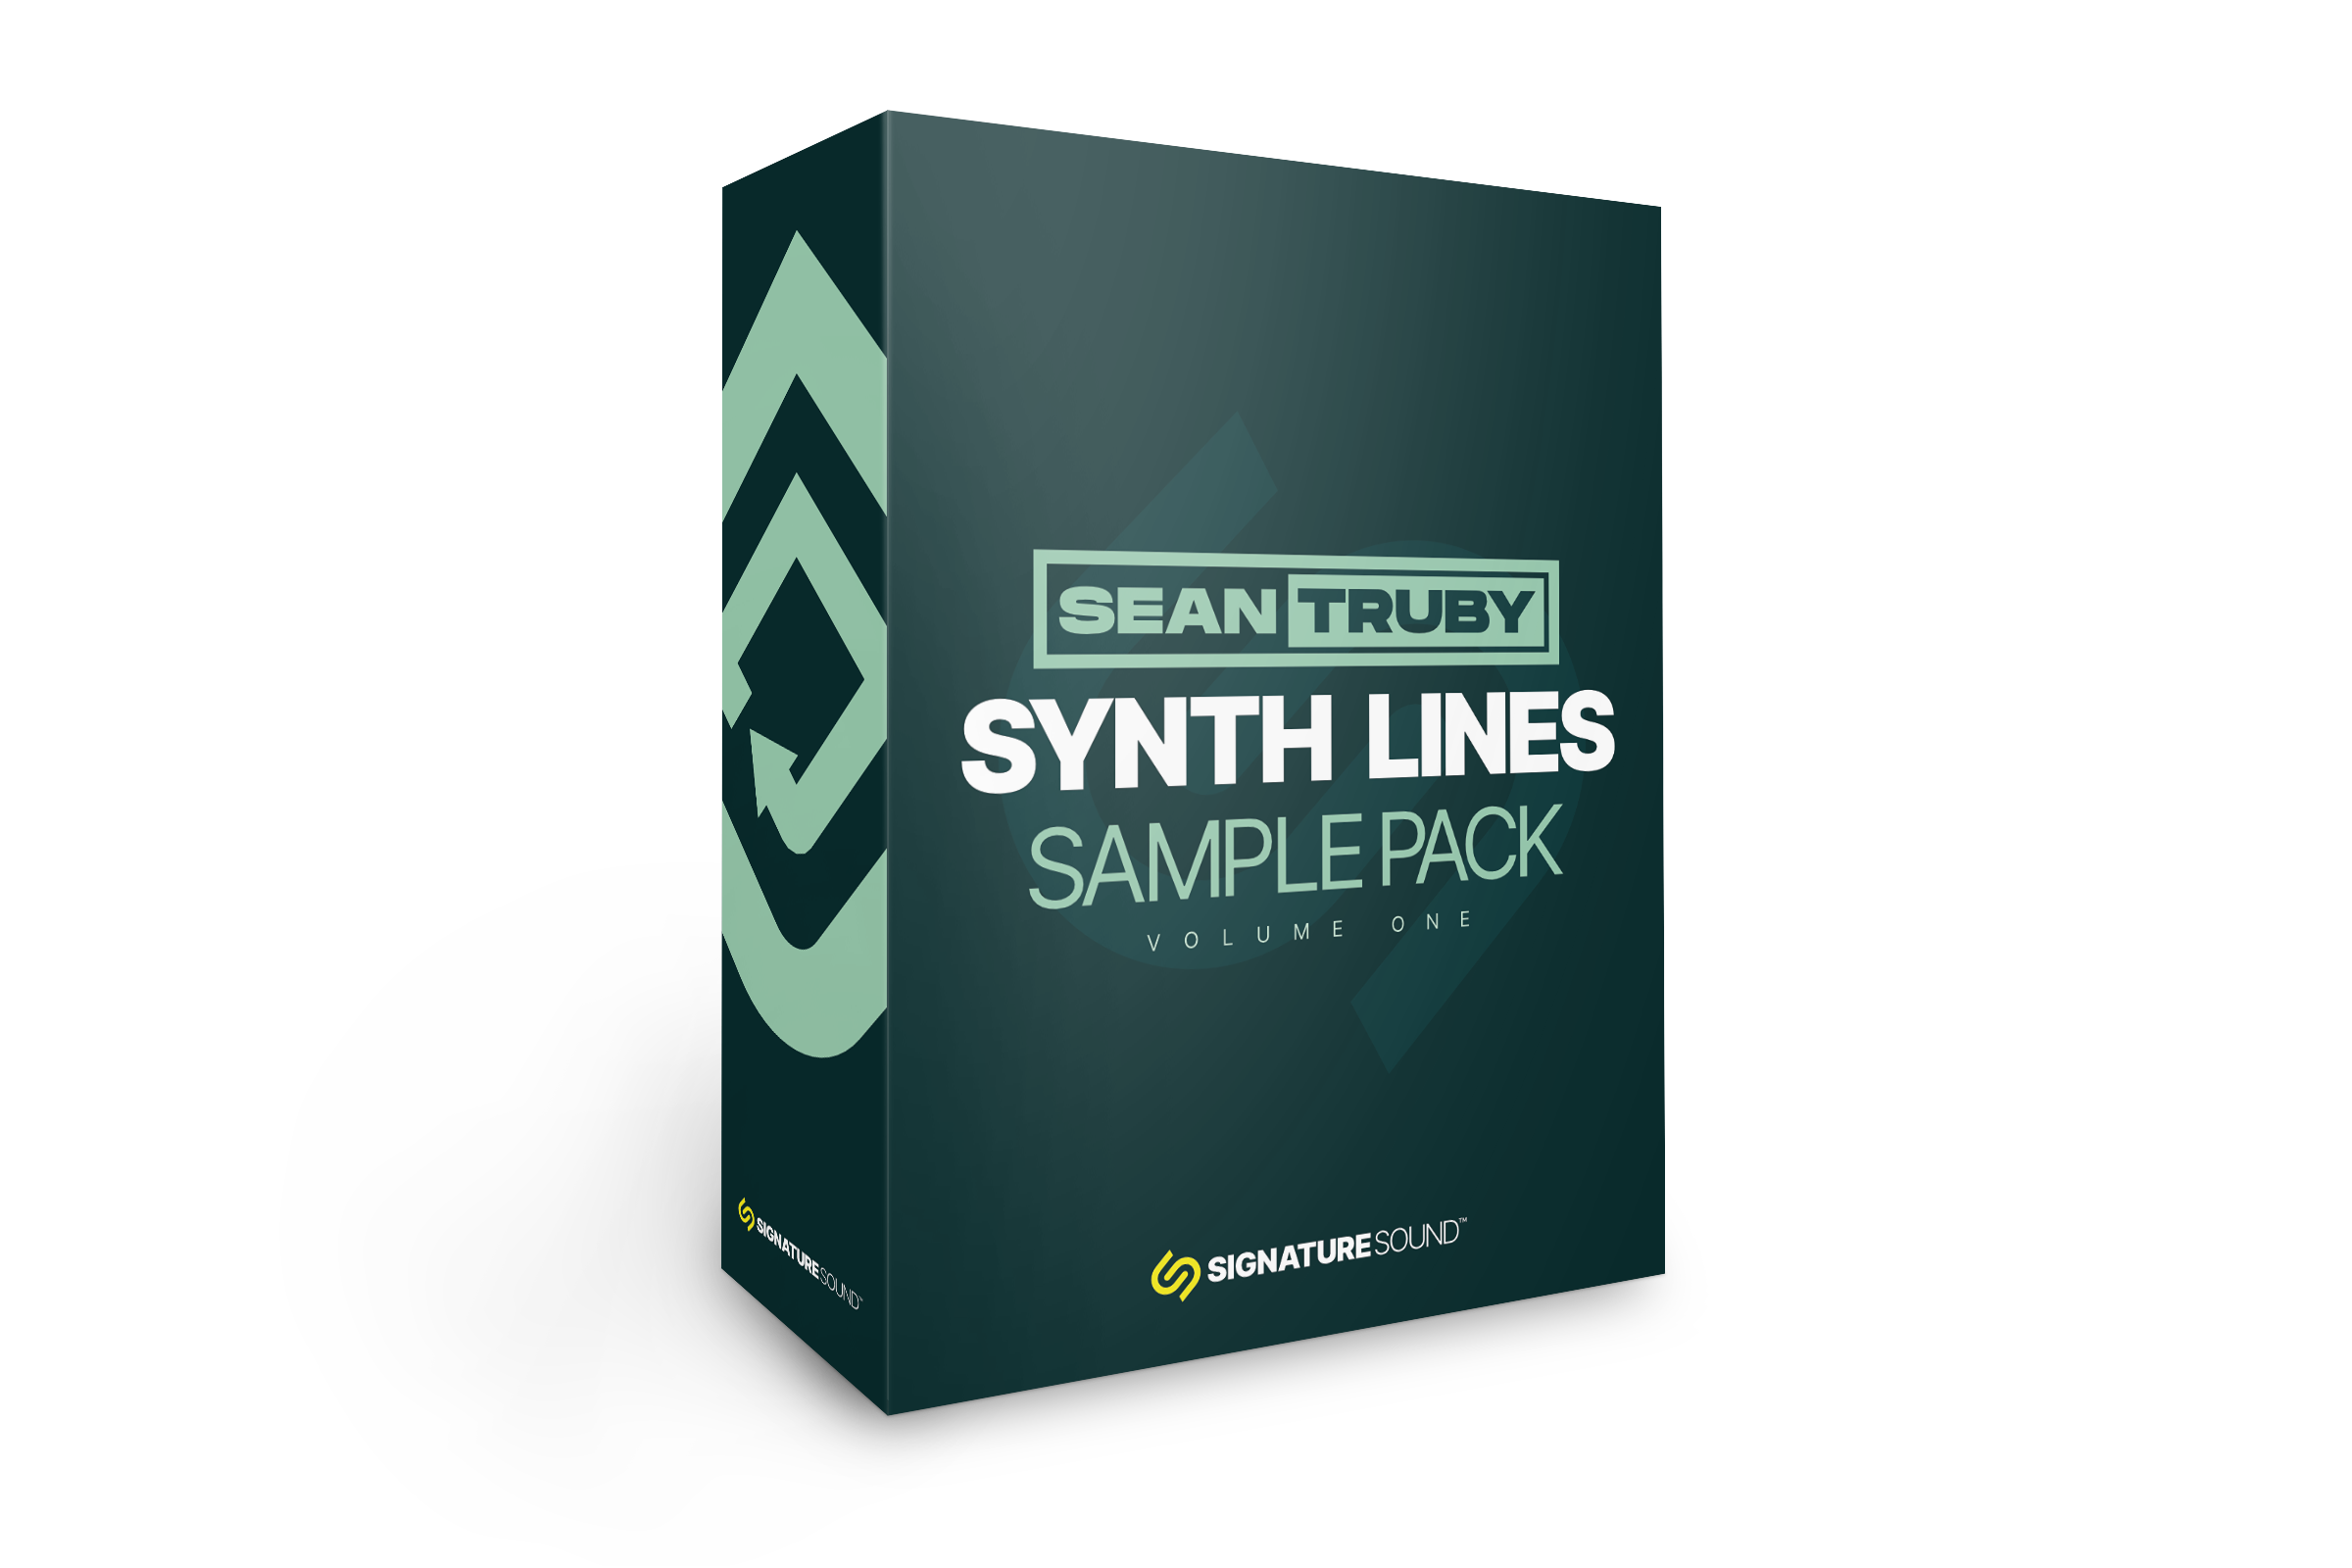 Sean Truby Synth Lines [Sample Pack] Volume One